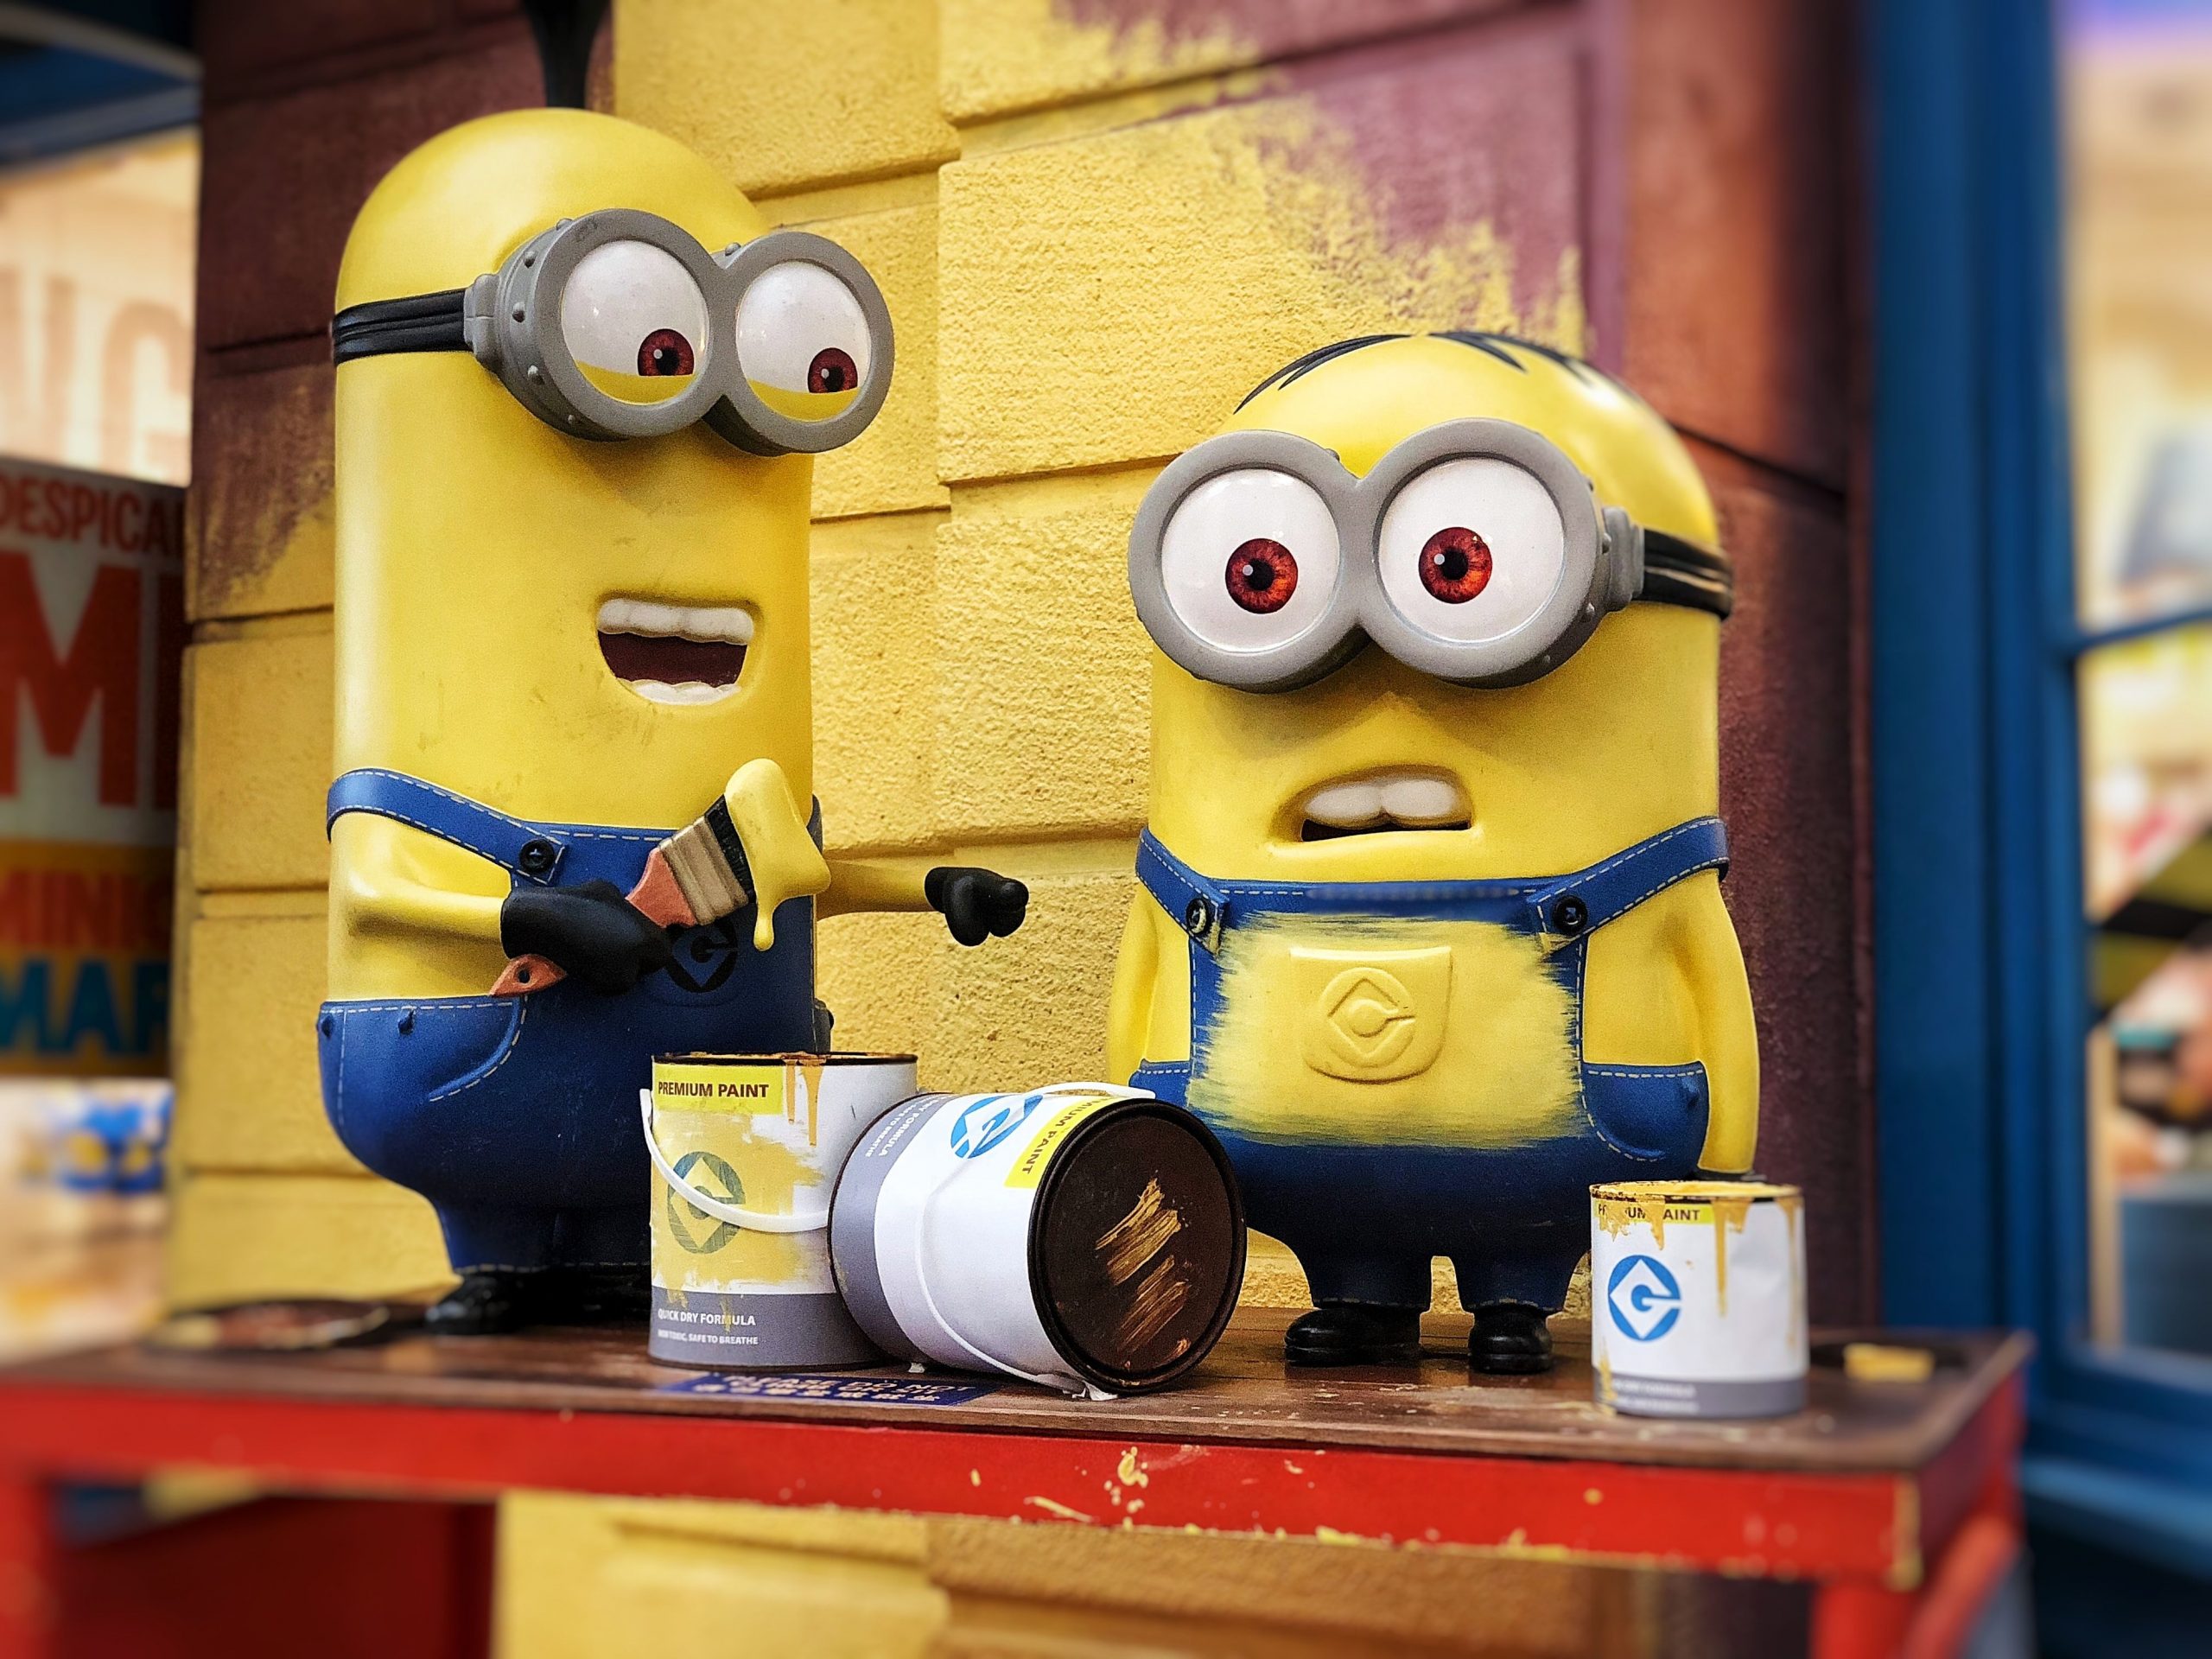 Every Despicable Me film: From worst to best